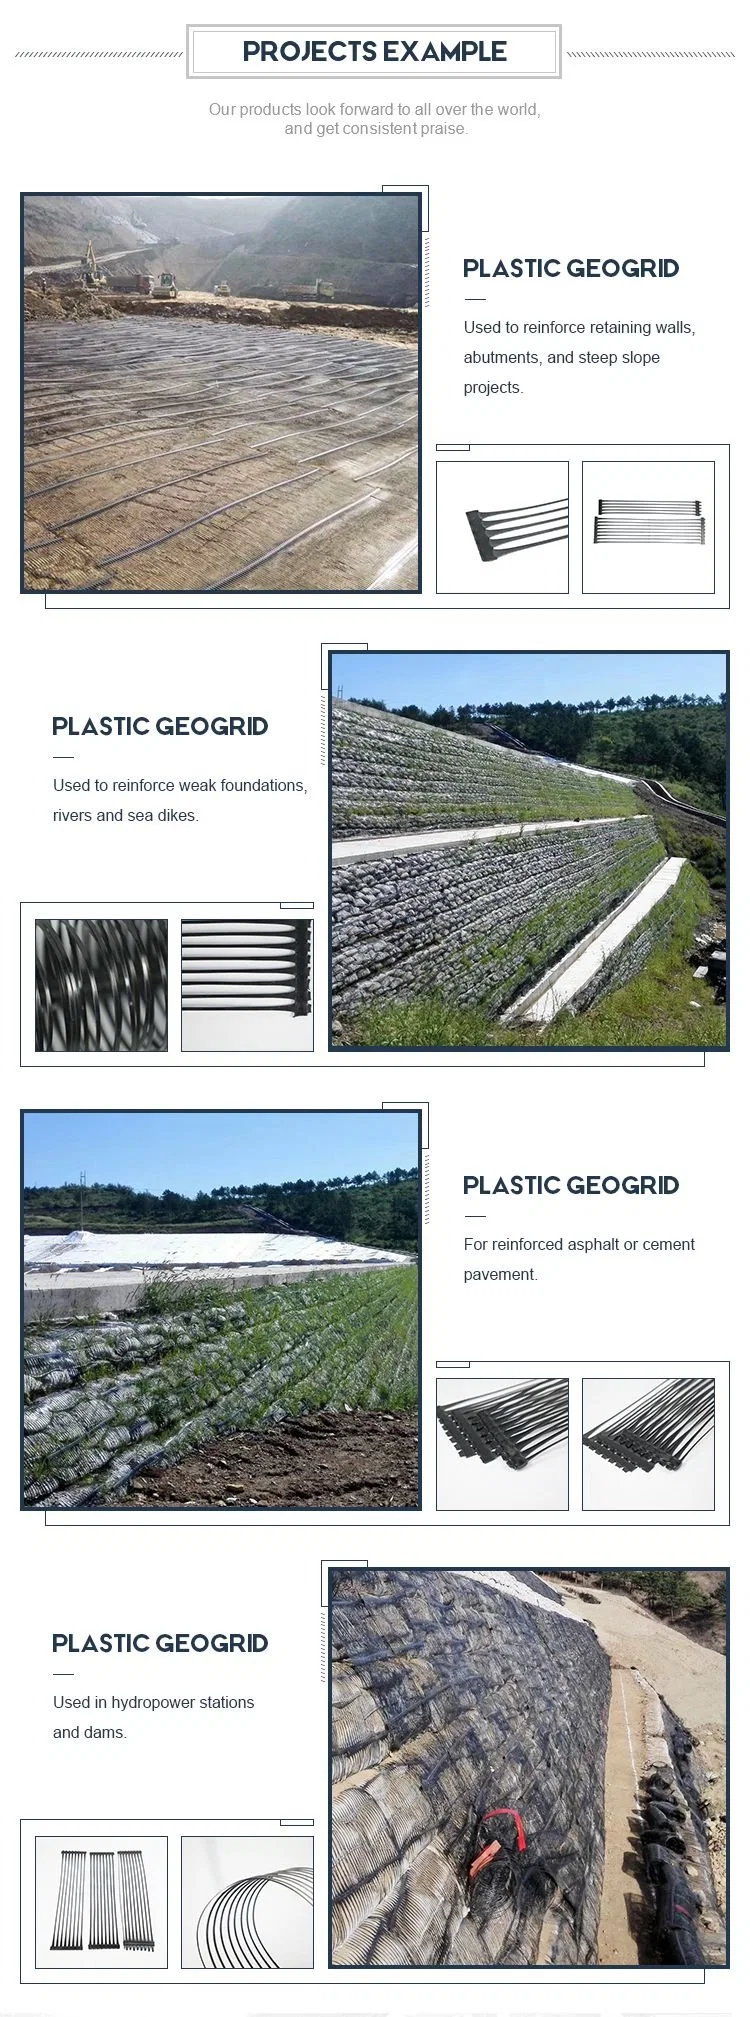 Uniaxial Geogrid, Geosynthetics Manufacturer